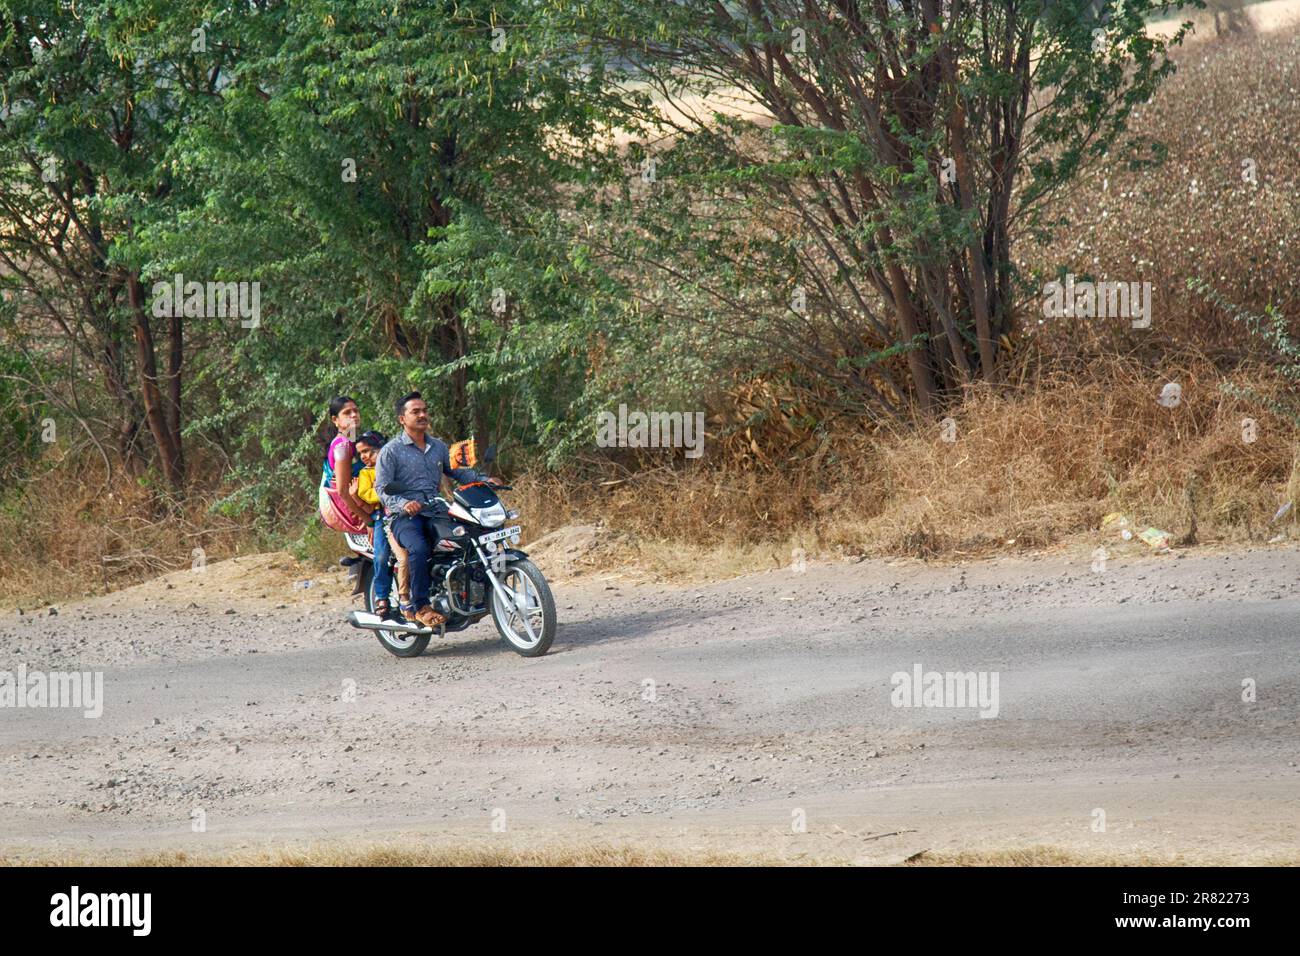 India, Pune - April 6, 2018: Young Indian family with a child on a motorcycle. Woman is sitting sideways, not astride Stock Photo